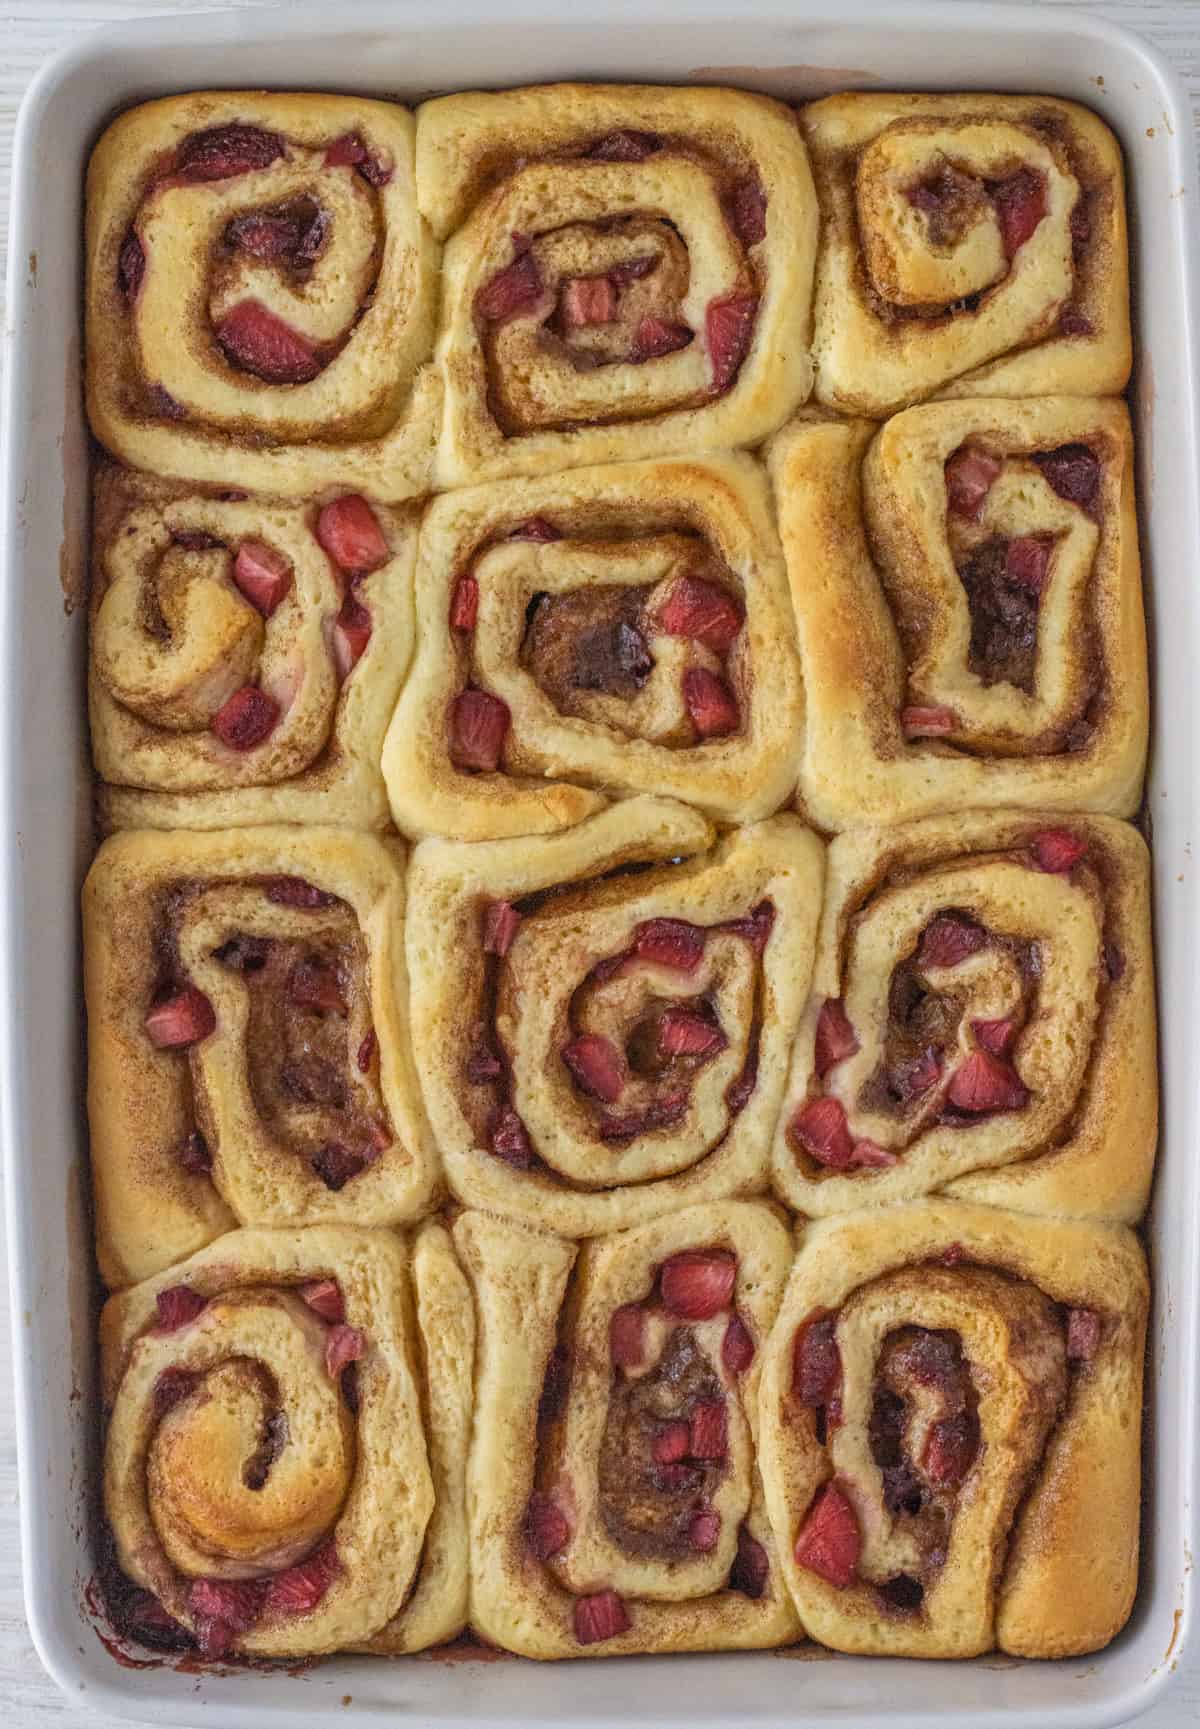 Strawberry cinnamon rolls baked but not frosted.